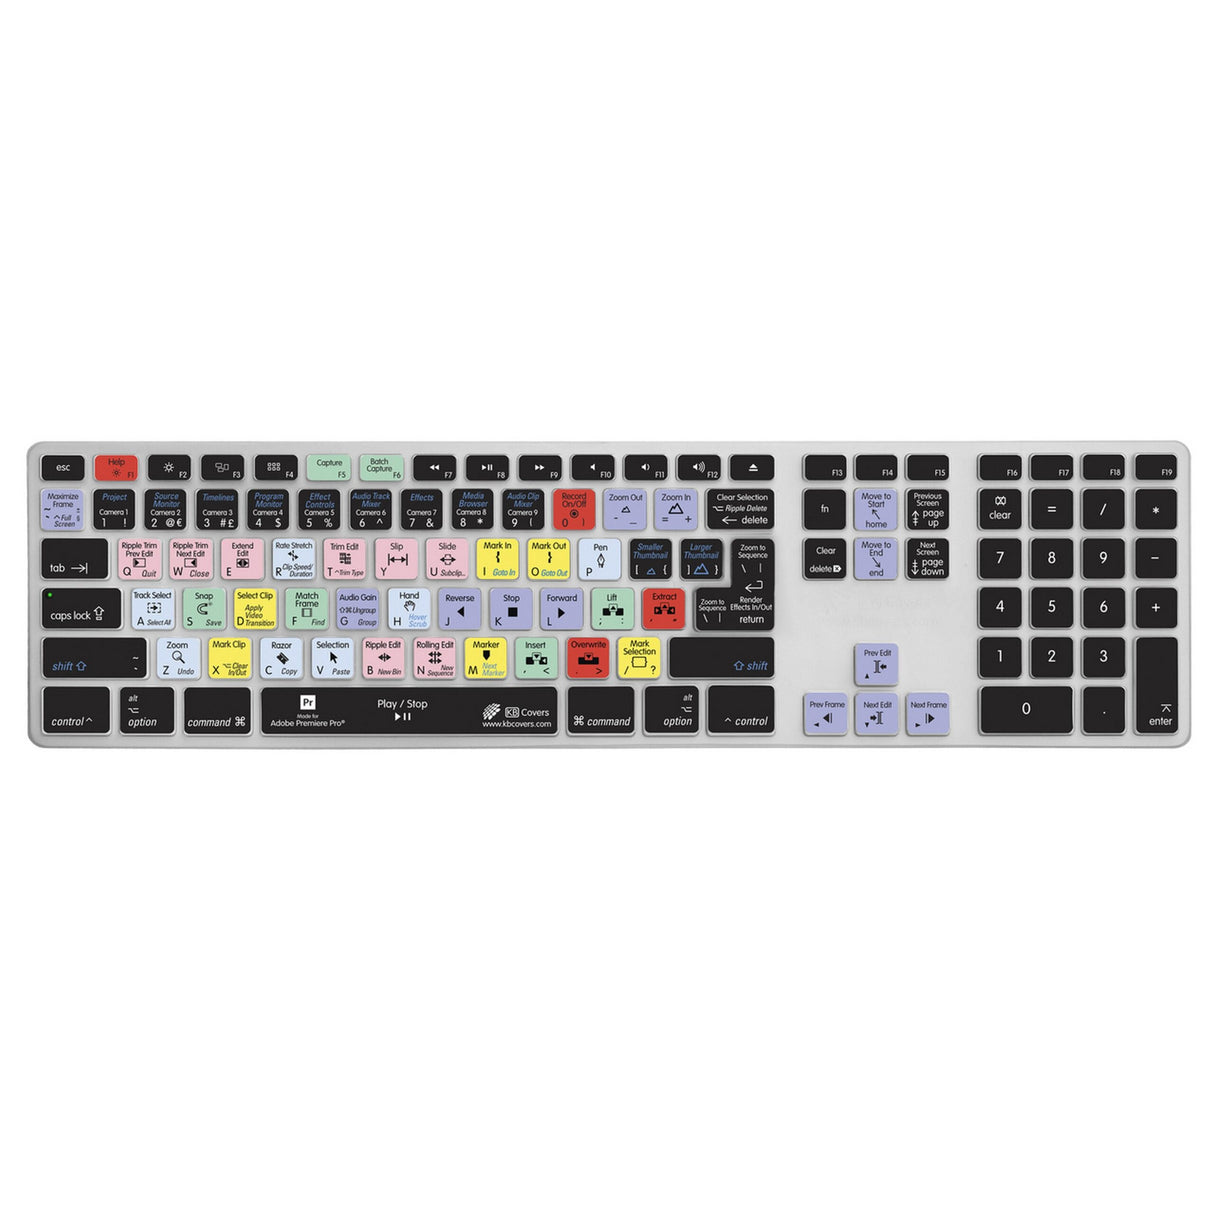 KB Covers PR-AK-CC-2 Premiere Pro Keyboard Cover for Apple Ultra-Thin Keyboard with Num Pad